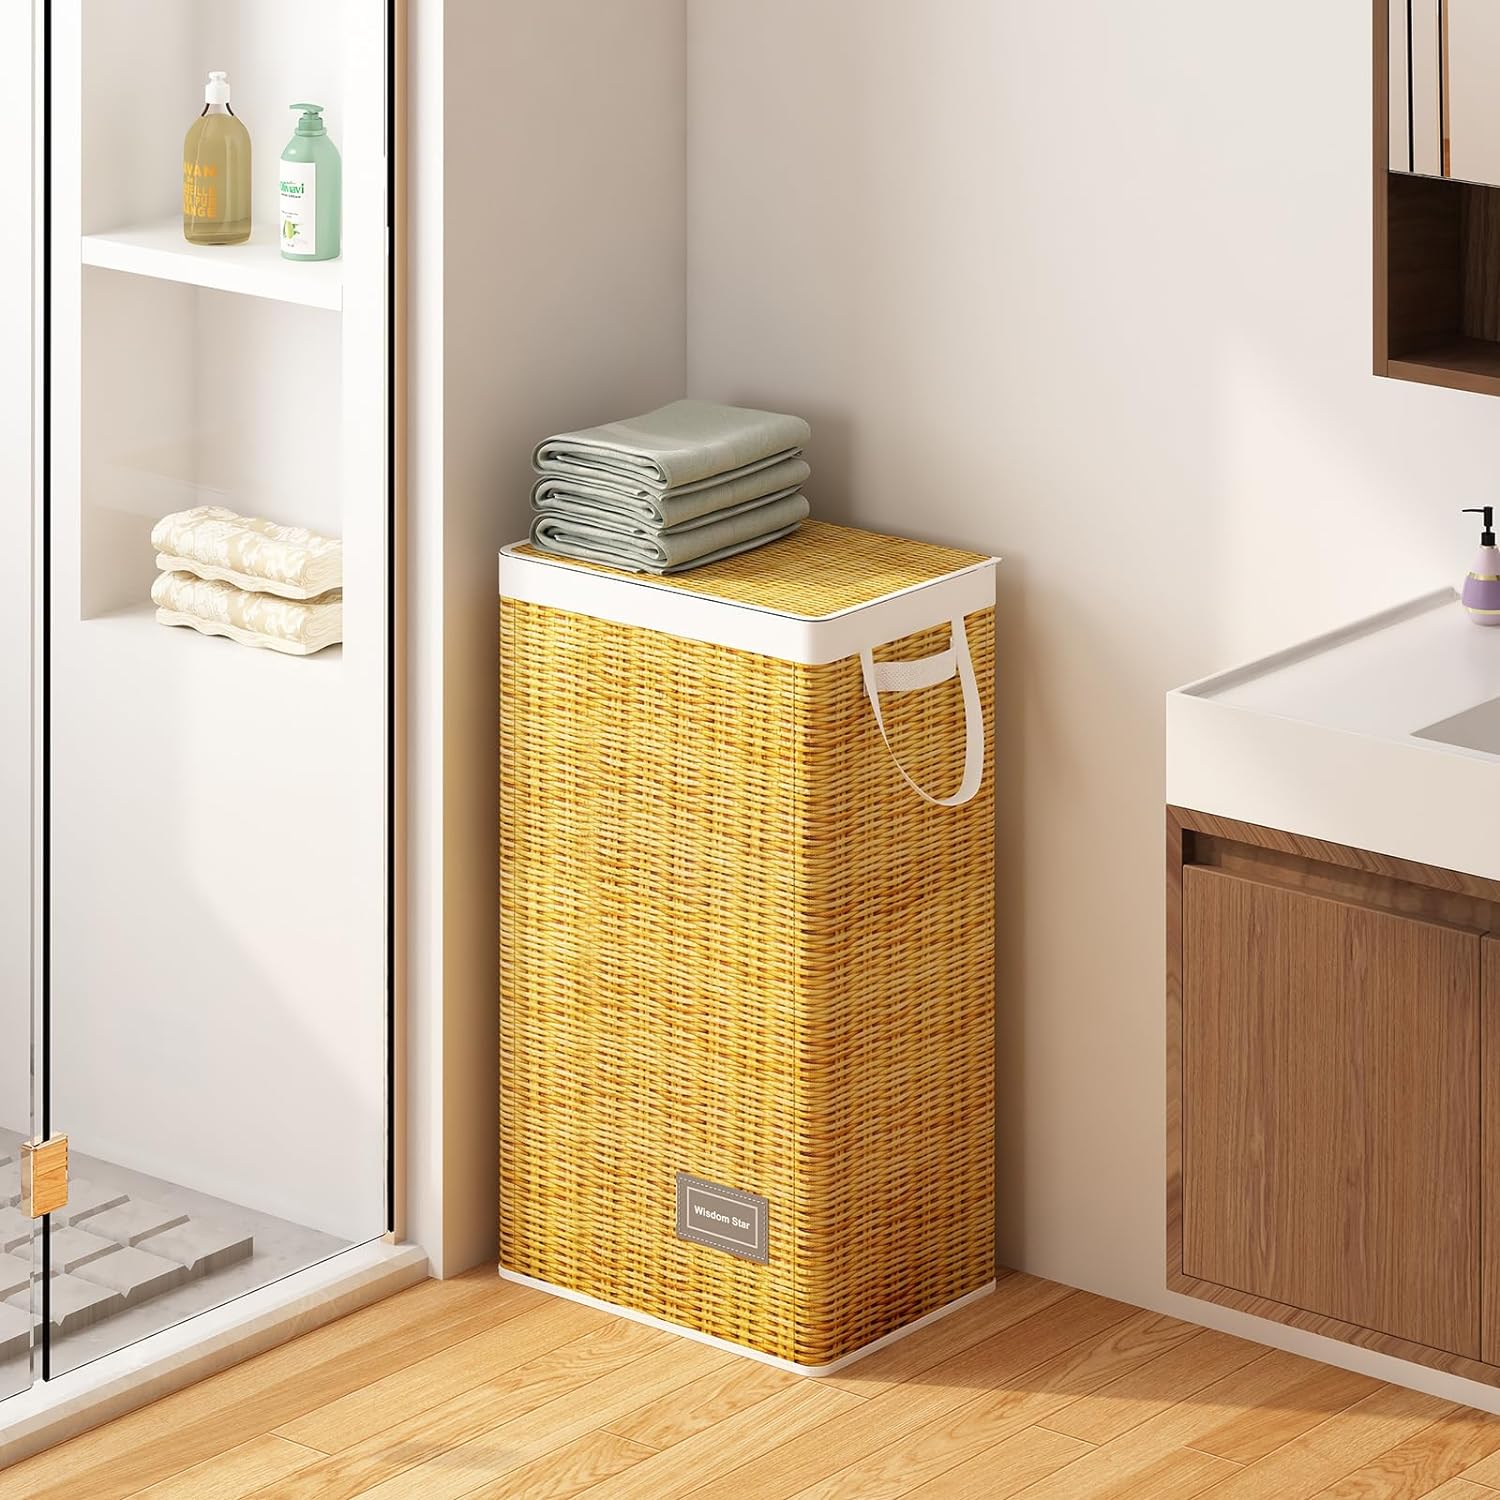 This is a great space saver and looks good. Used to keep my dirty laundry in a laundry basket but lost closet space when I moved and didn't want to keep the basket out in the open. This fits nicely in a bathroom and the removable bag makes it easy to carry the clothes to the washer. Super easy to put together too!